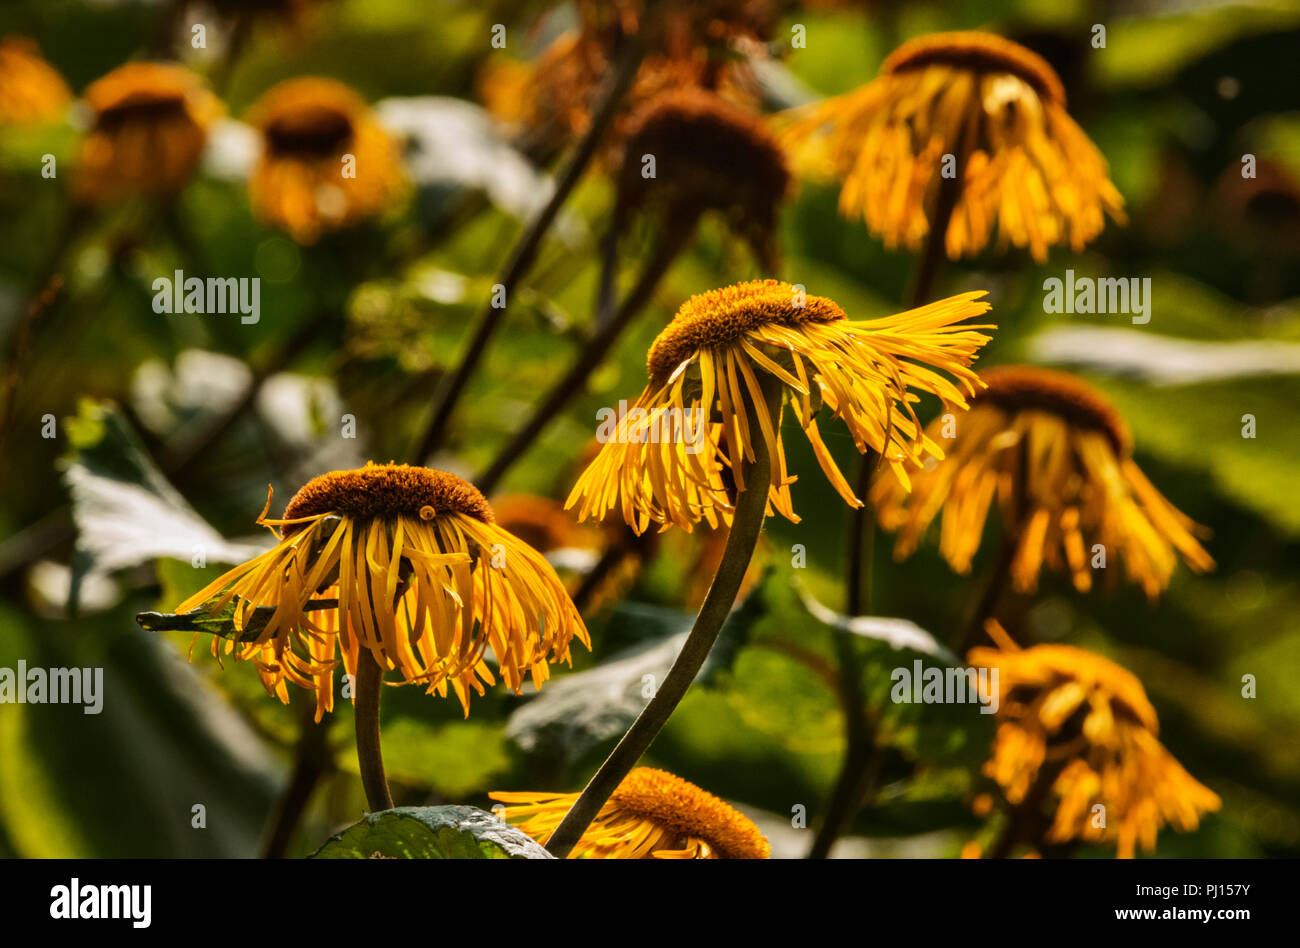 Several telekia speciosa flowers  ( heartleaf oxeye or yellow oxeye ),daisy-like flower head with yellow rays and large flattened orange center disk , Stock Photo